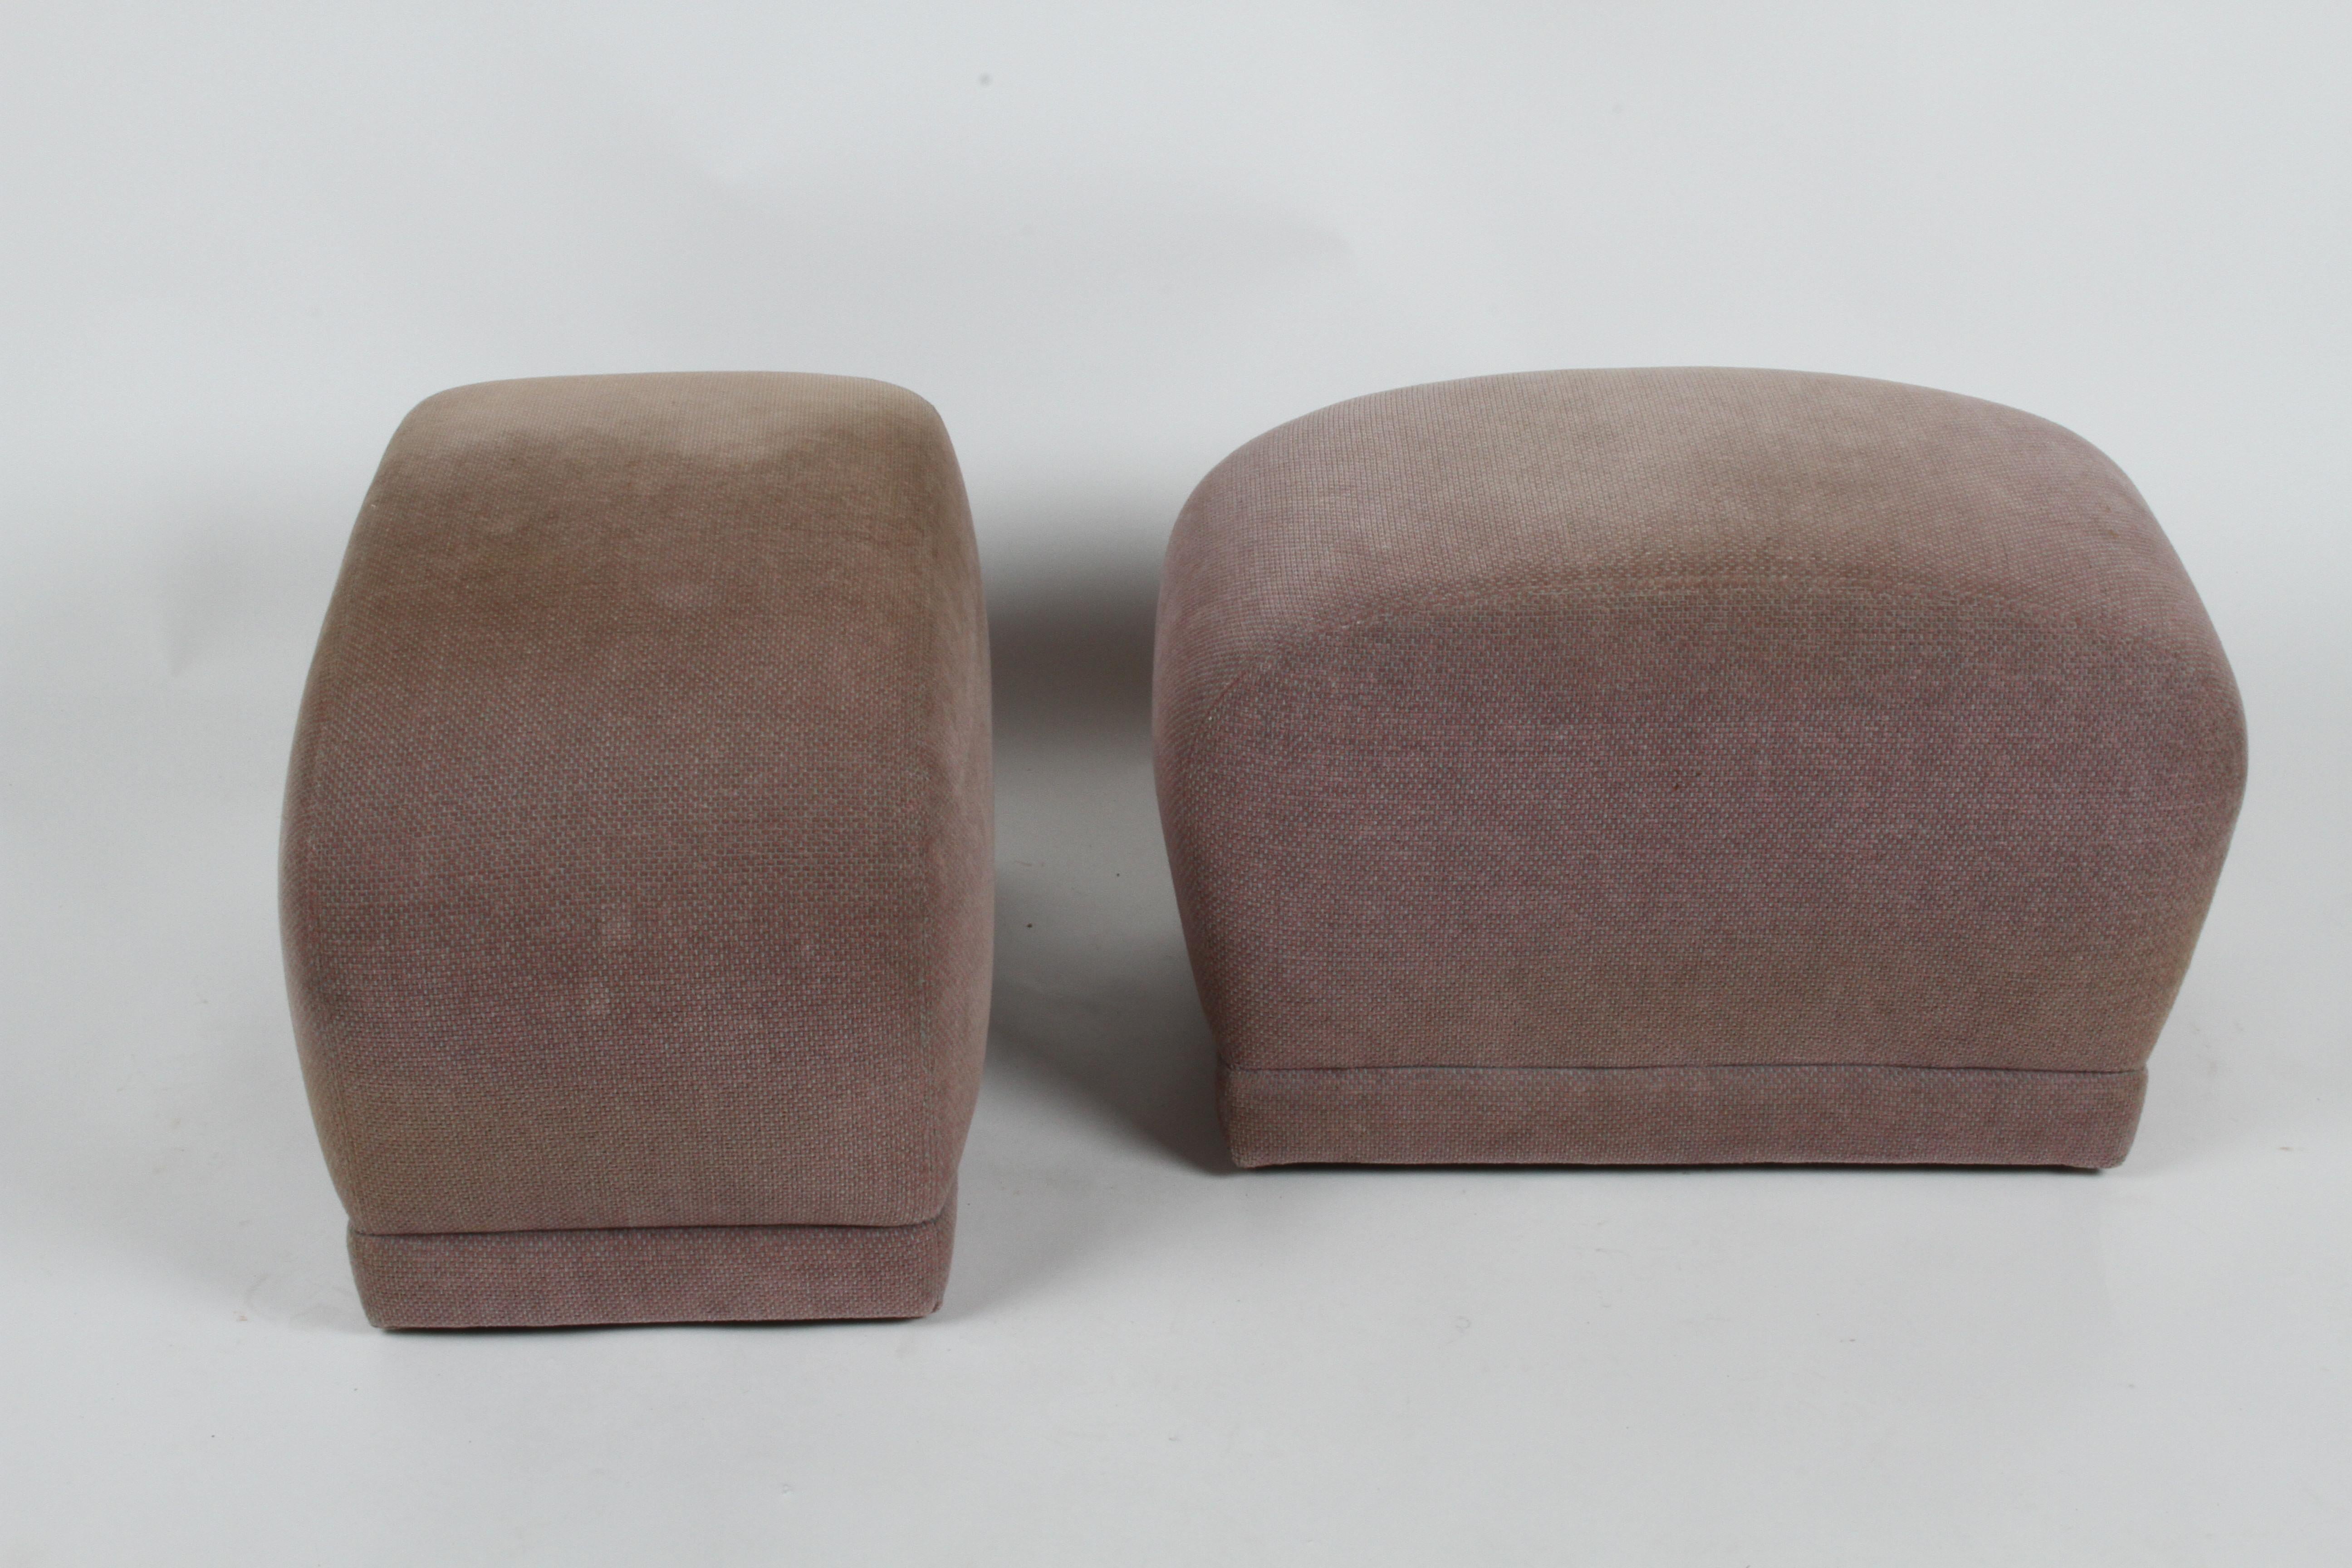 Upholstery Pair of 1980's Upholstered Poufs or Ottomans on Castors, Style of Milo Baughman